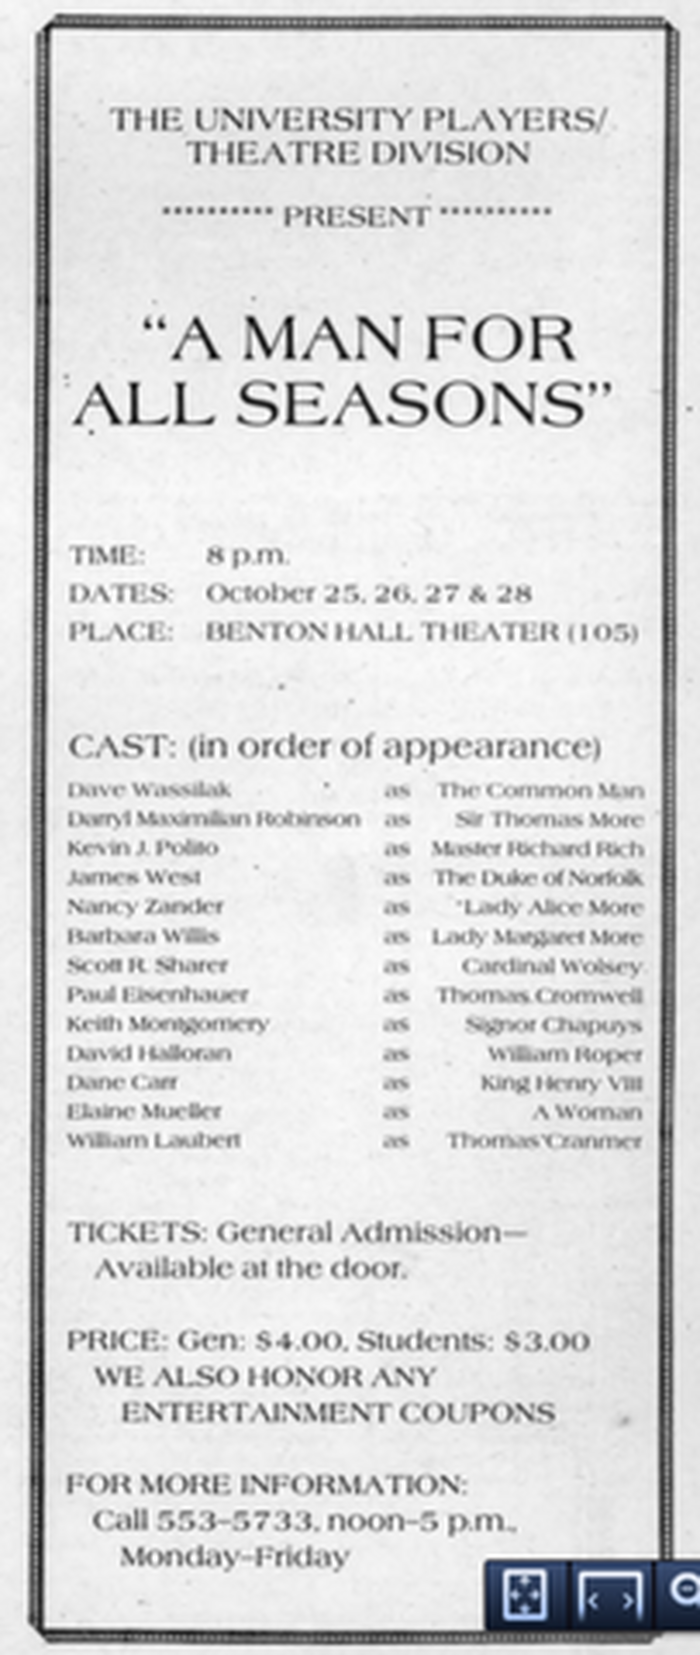 A Play of Conscience: Darryl Maximilian Robinson was the first African-American actor to play Sir Thomas More in the Robert Bolt play A Man For All Seasons at The University of Missouri-St.Louis. 6